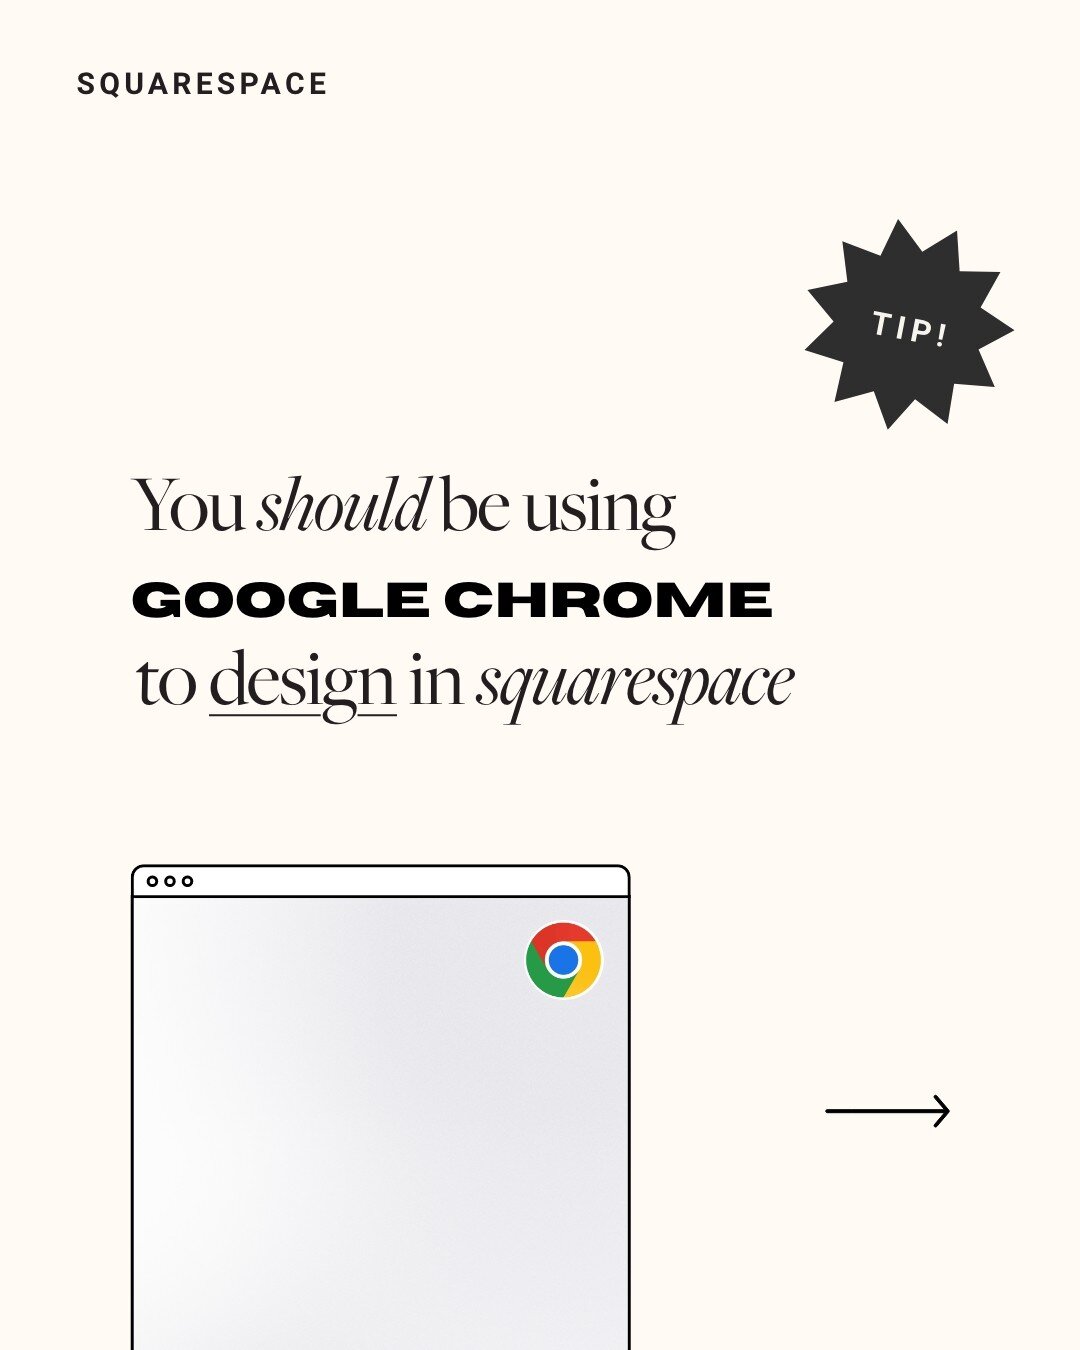 Did you know that you should be using Google Chrome to edit your Squarespace site? 🤔

We all know that Squarespace can get a liiittle glitchy sometimes, and one of the best ways around it is to make sure you're using Google Chrome as a browser when 